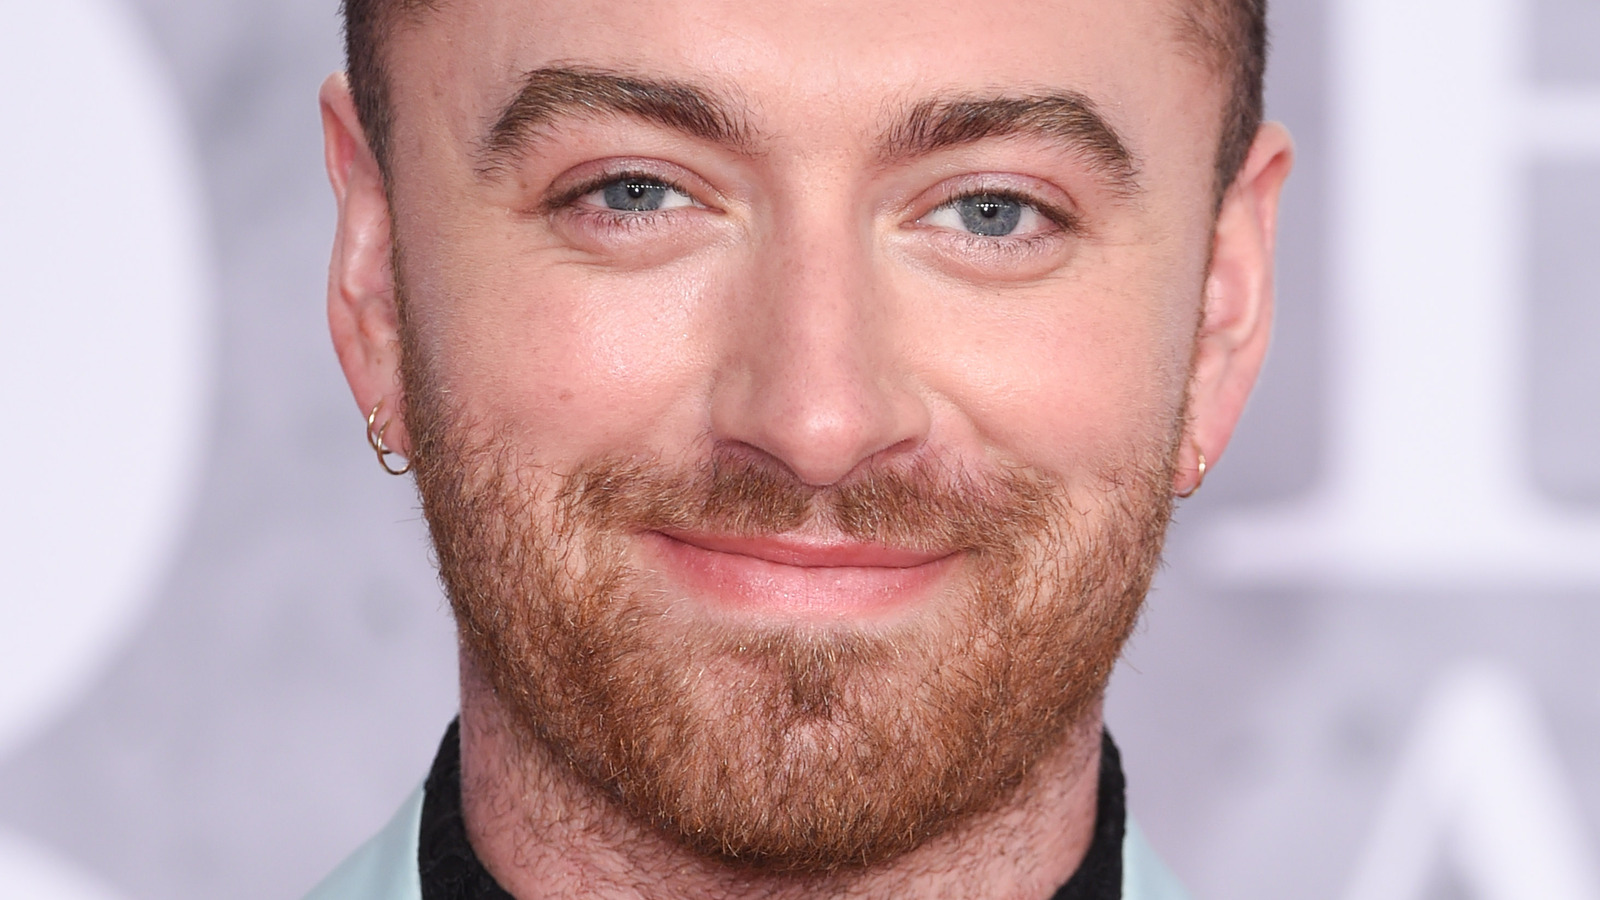 what really happened between sam smith and brandon flynn